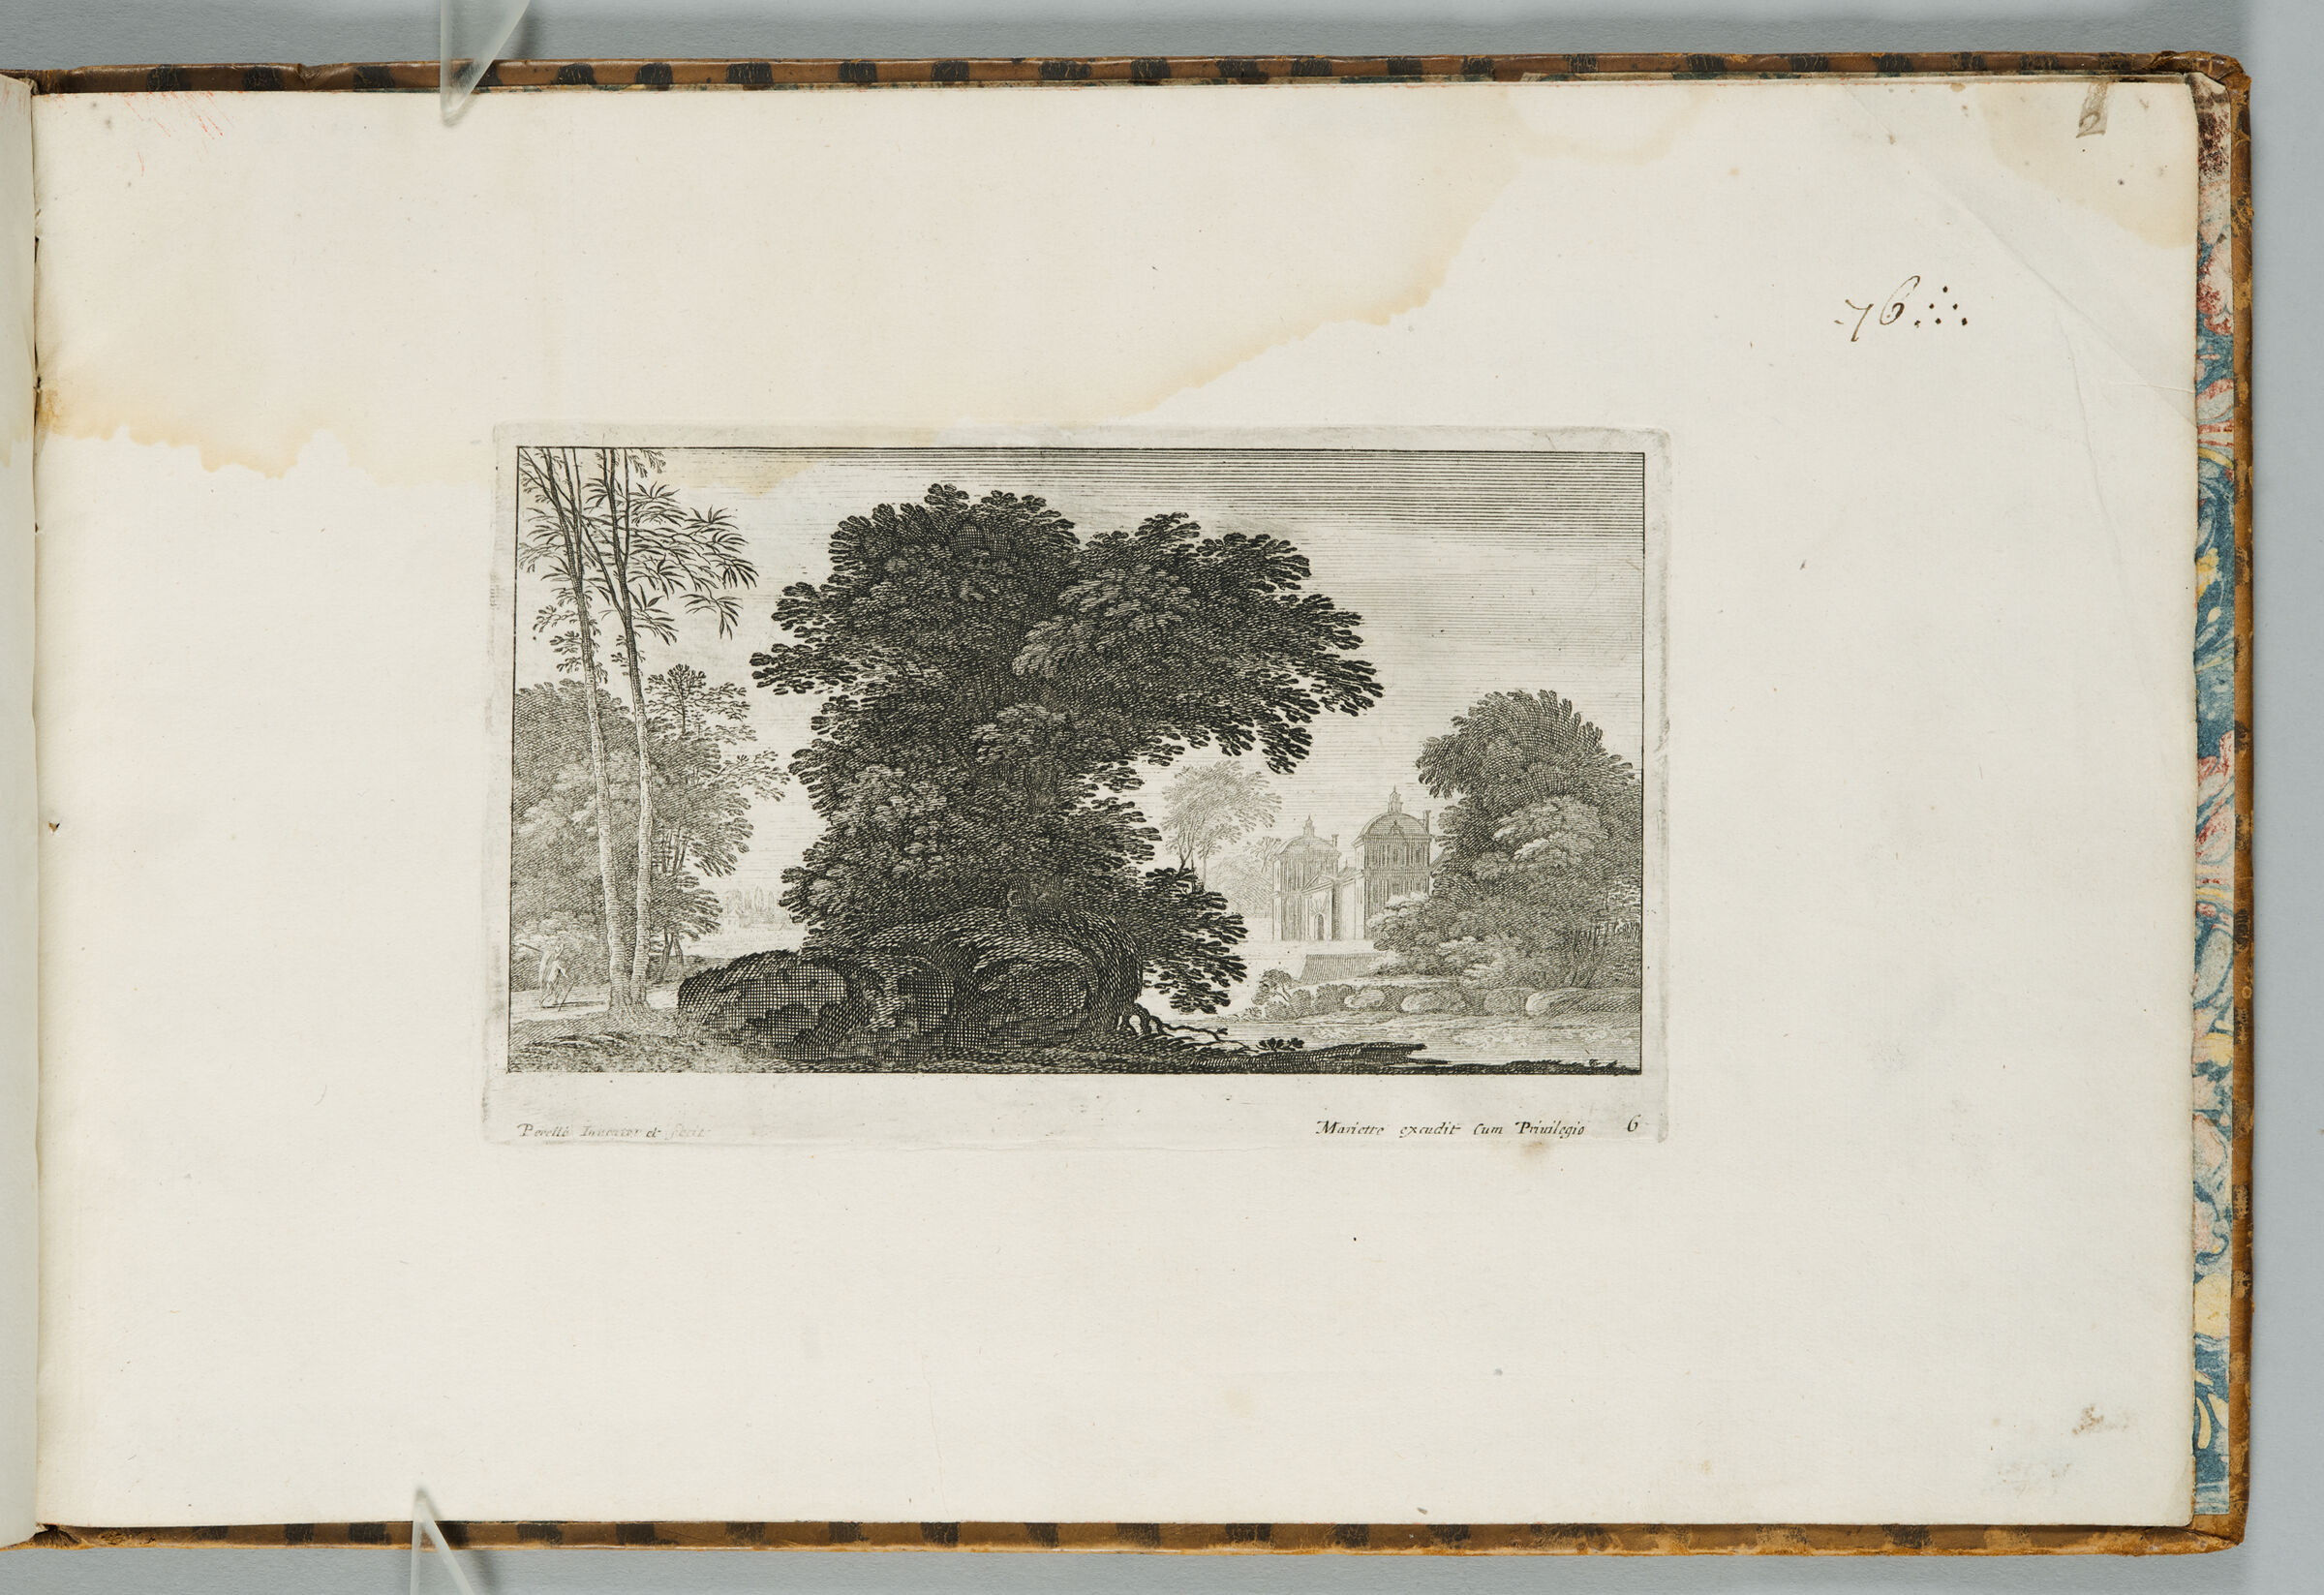 Landscape With A Large Tree And A Walled Estate At Right